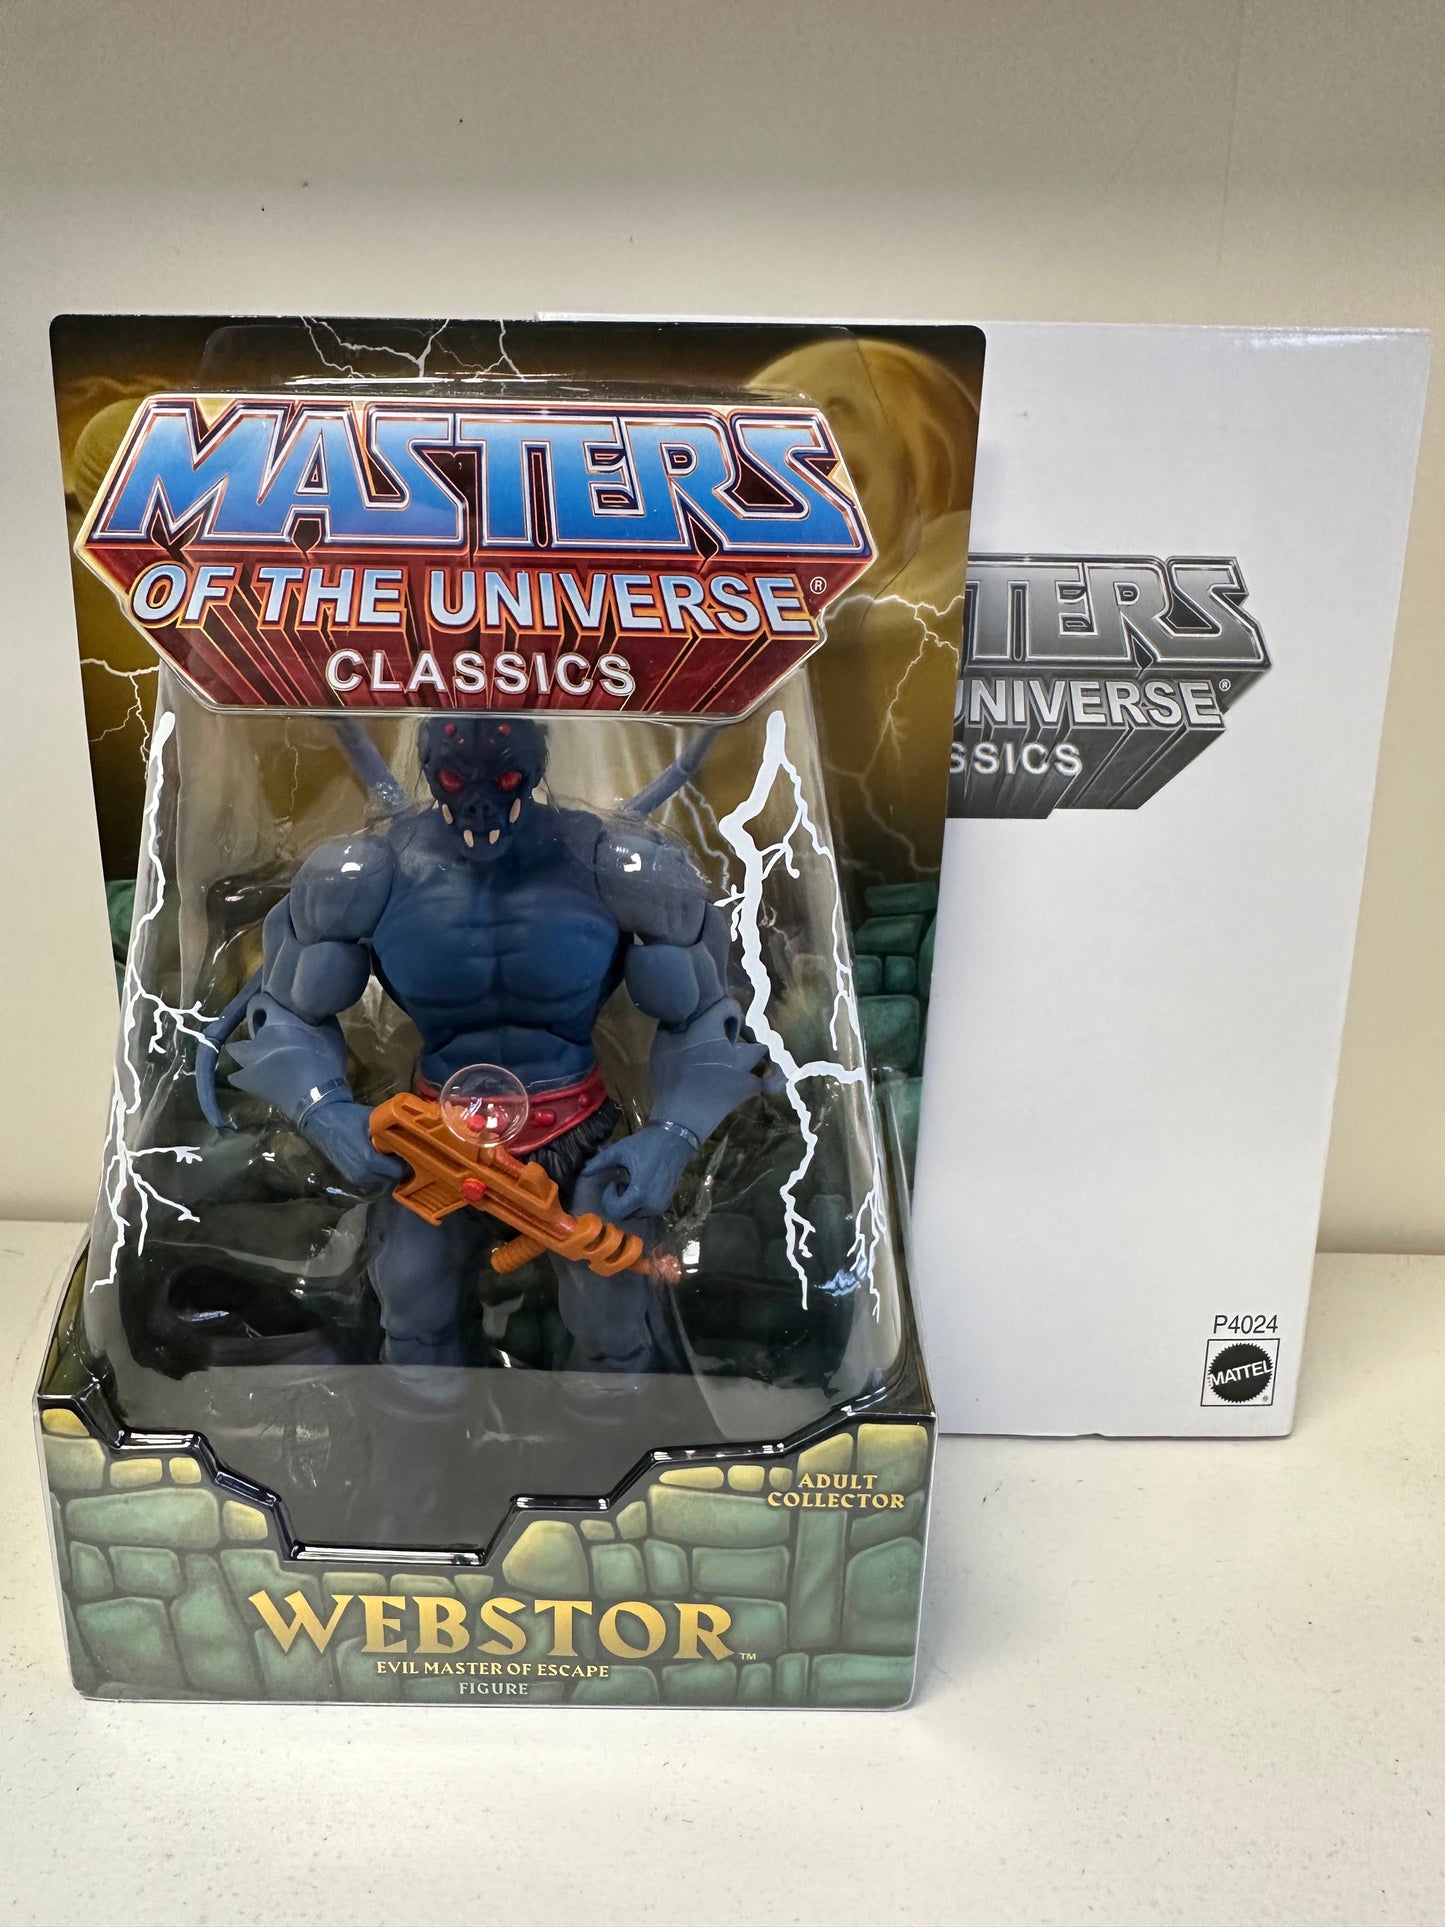 MOTUC Webstor He-Man Master’s of the Universe Classics Action Figure Sealed